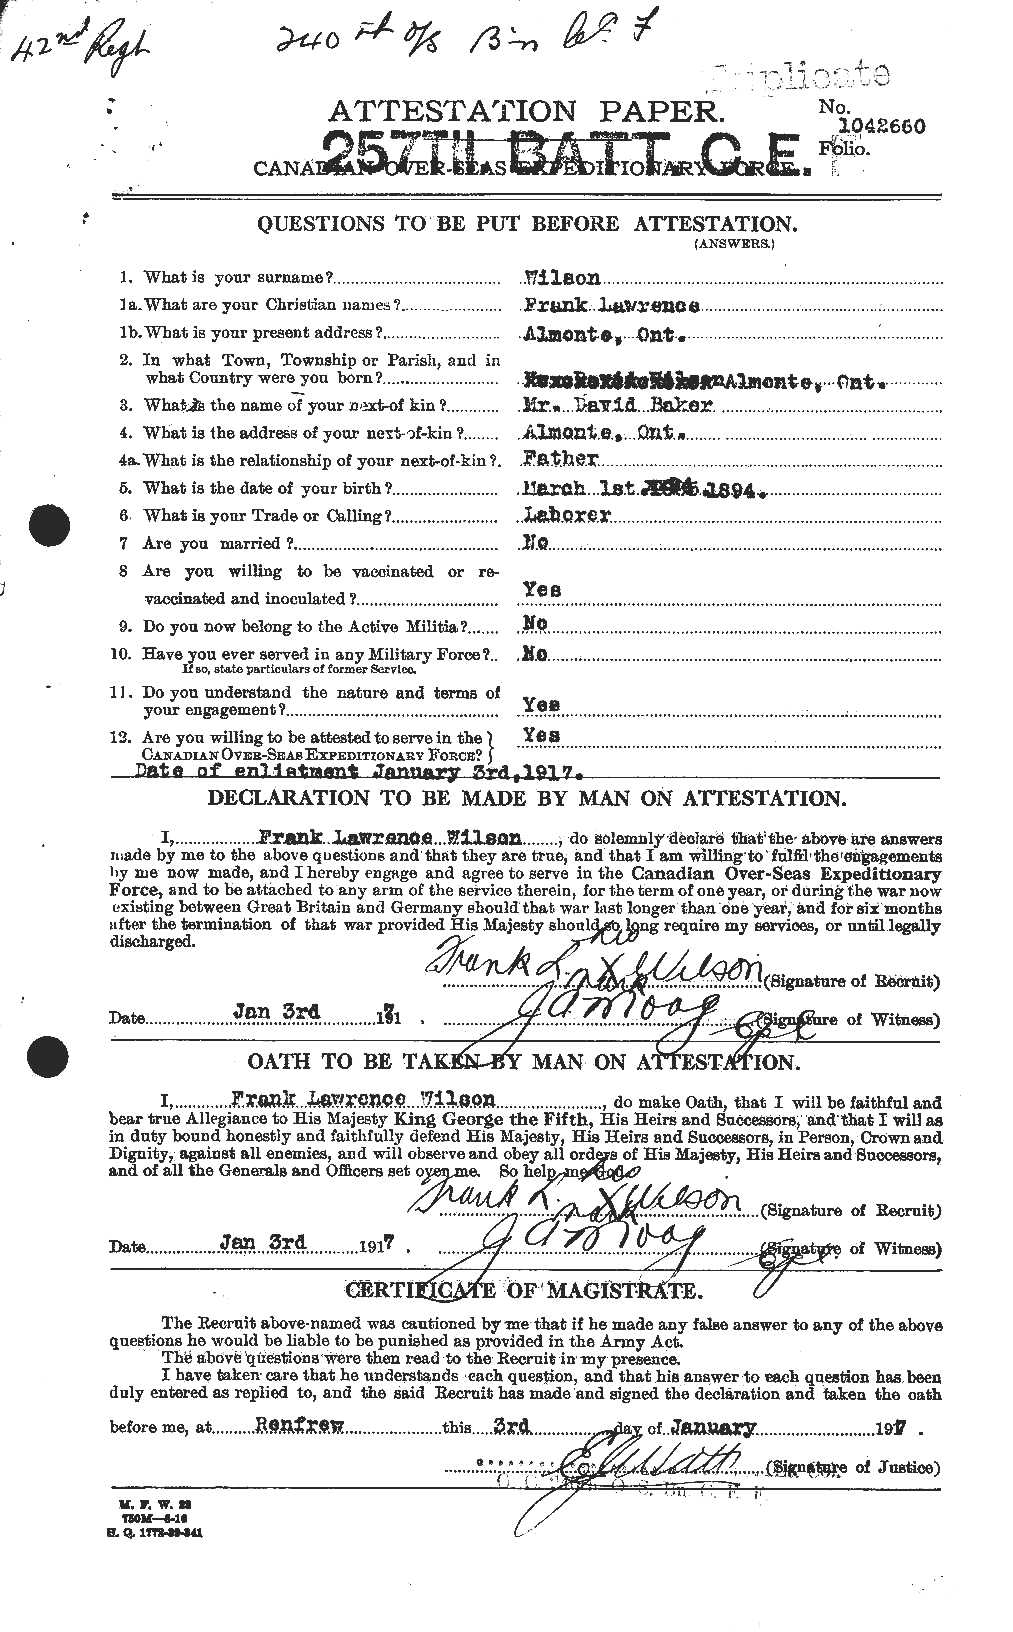 Personnel Records of the First World War - CEF 680679a